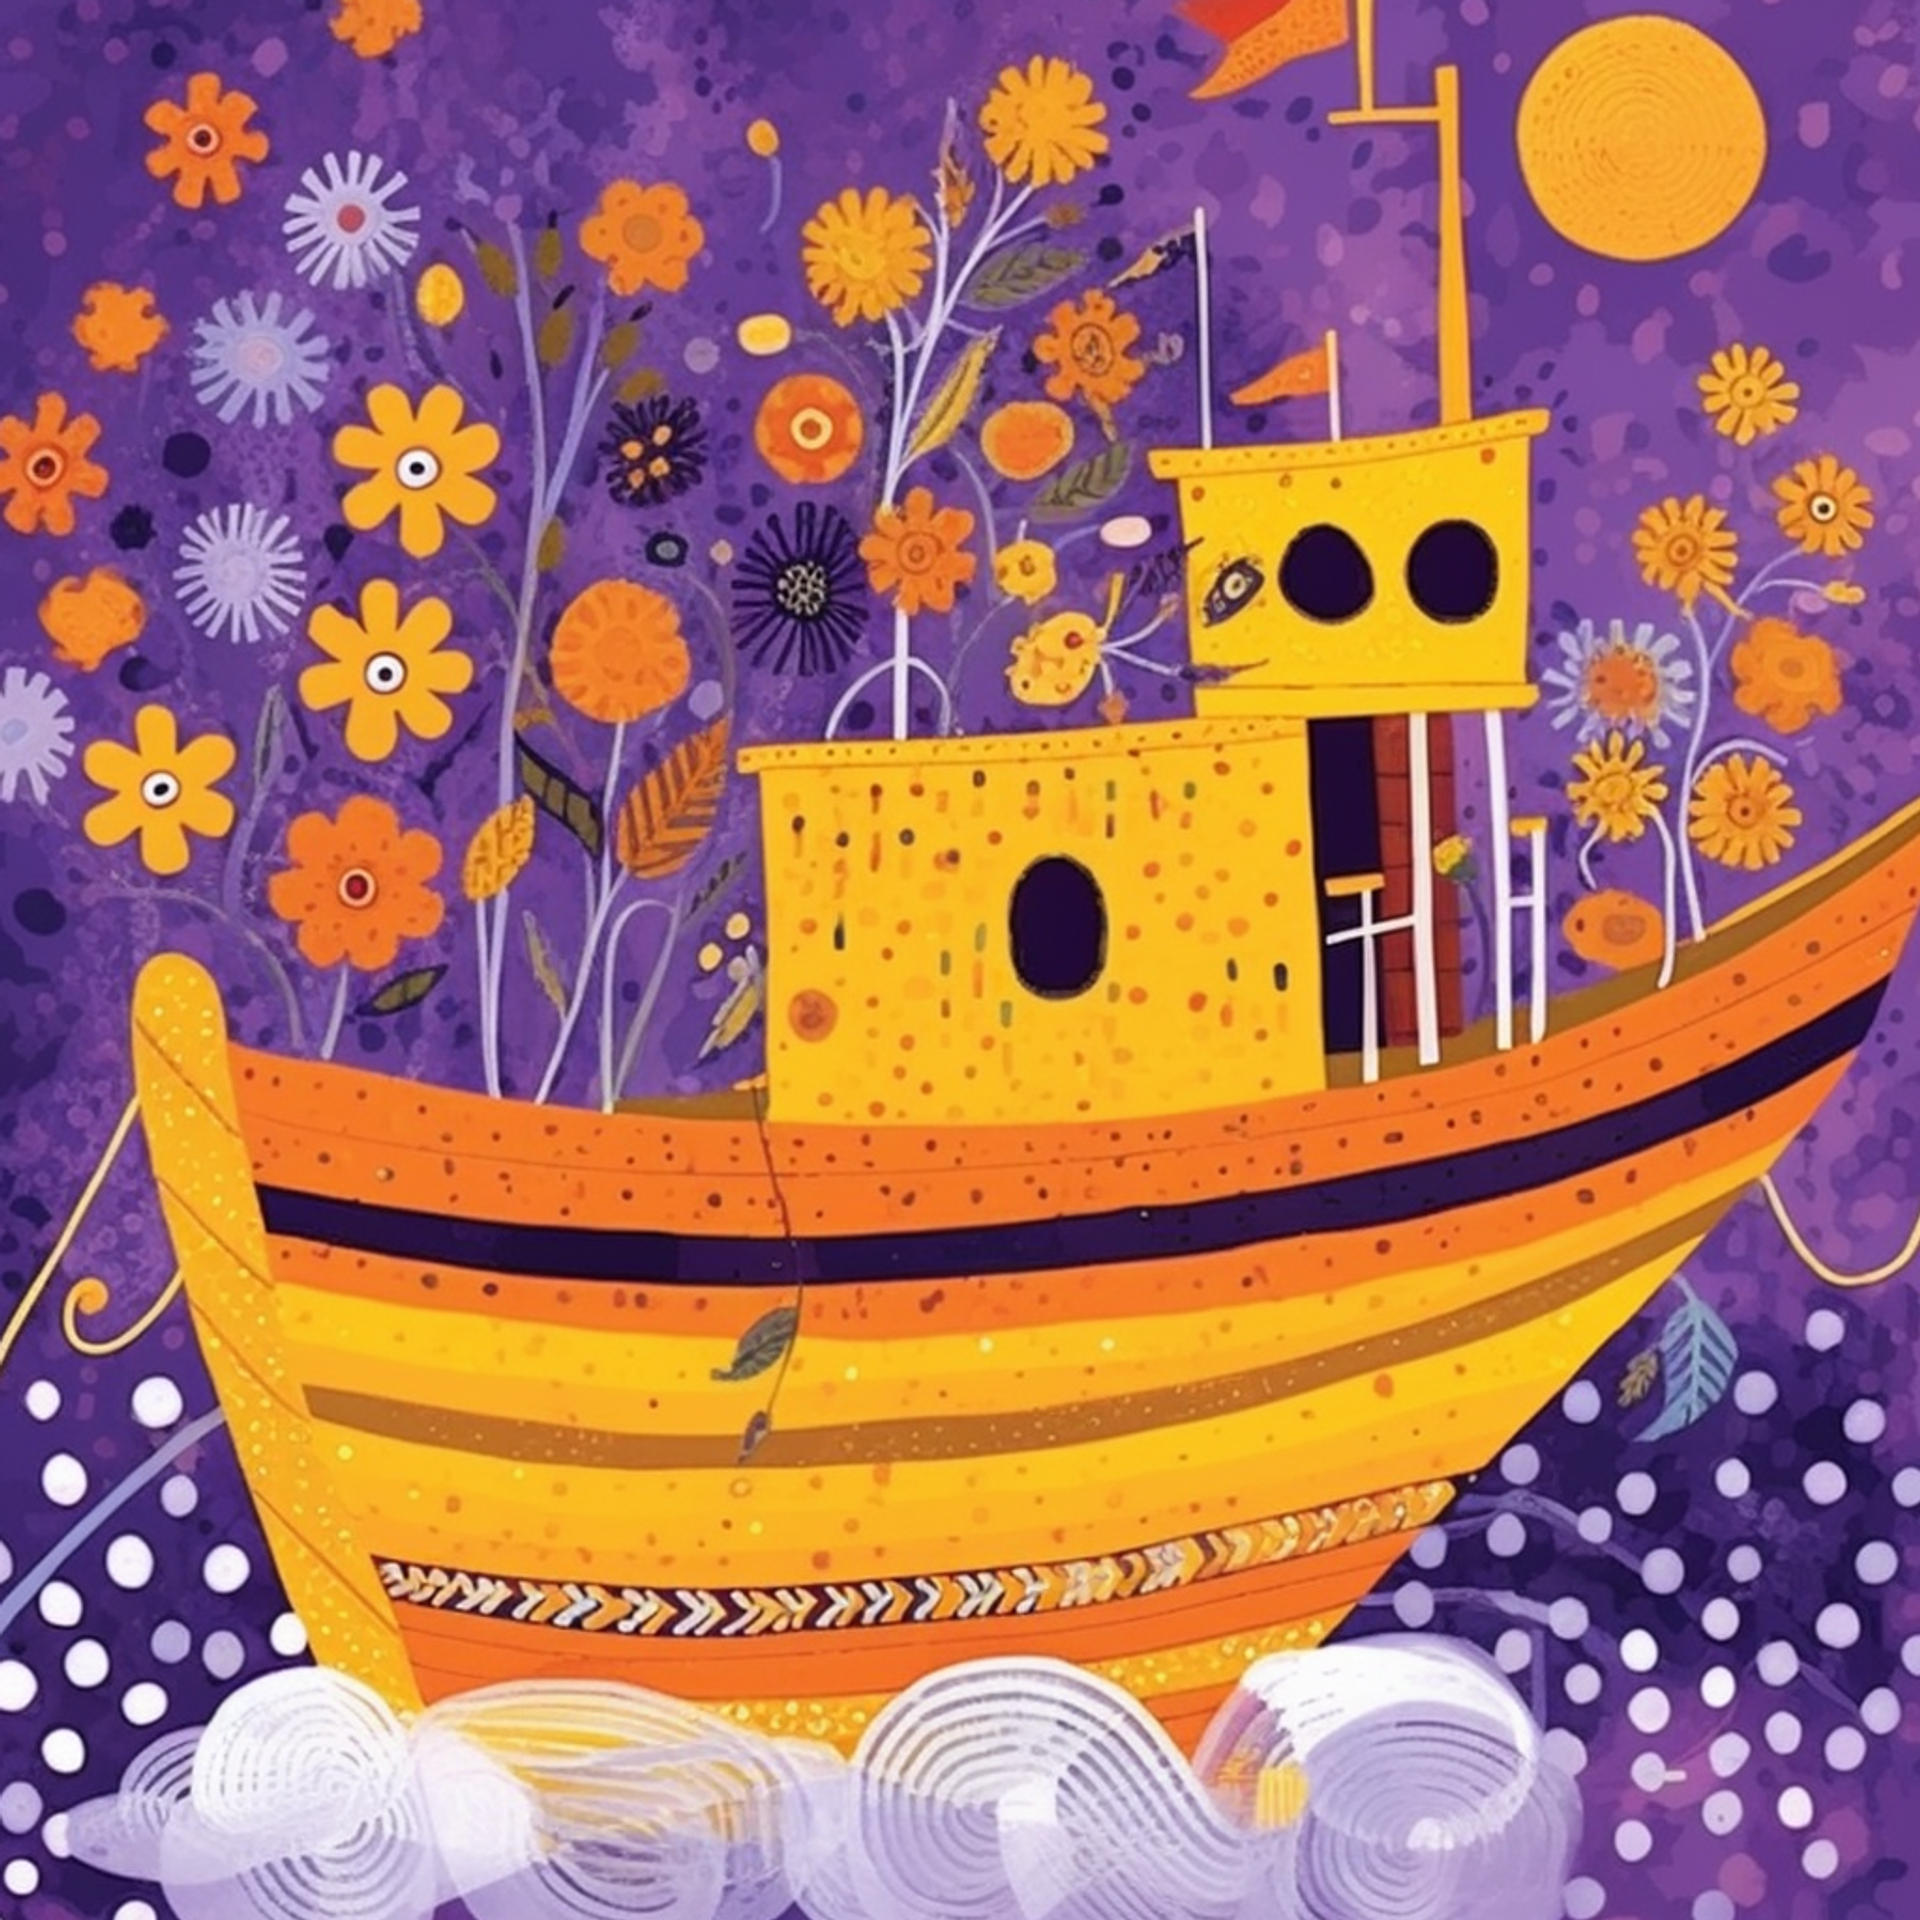 Boat in the Style of Bold Colors and Patterns AI Prompt - Prompt Combo